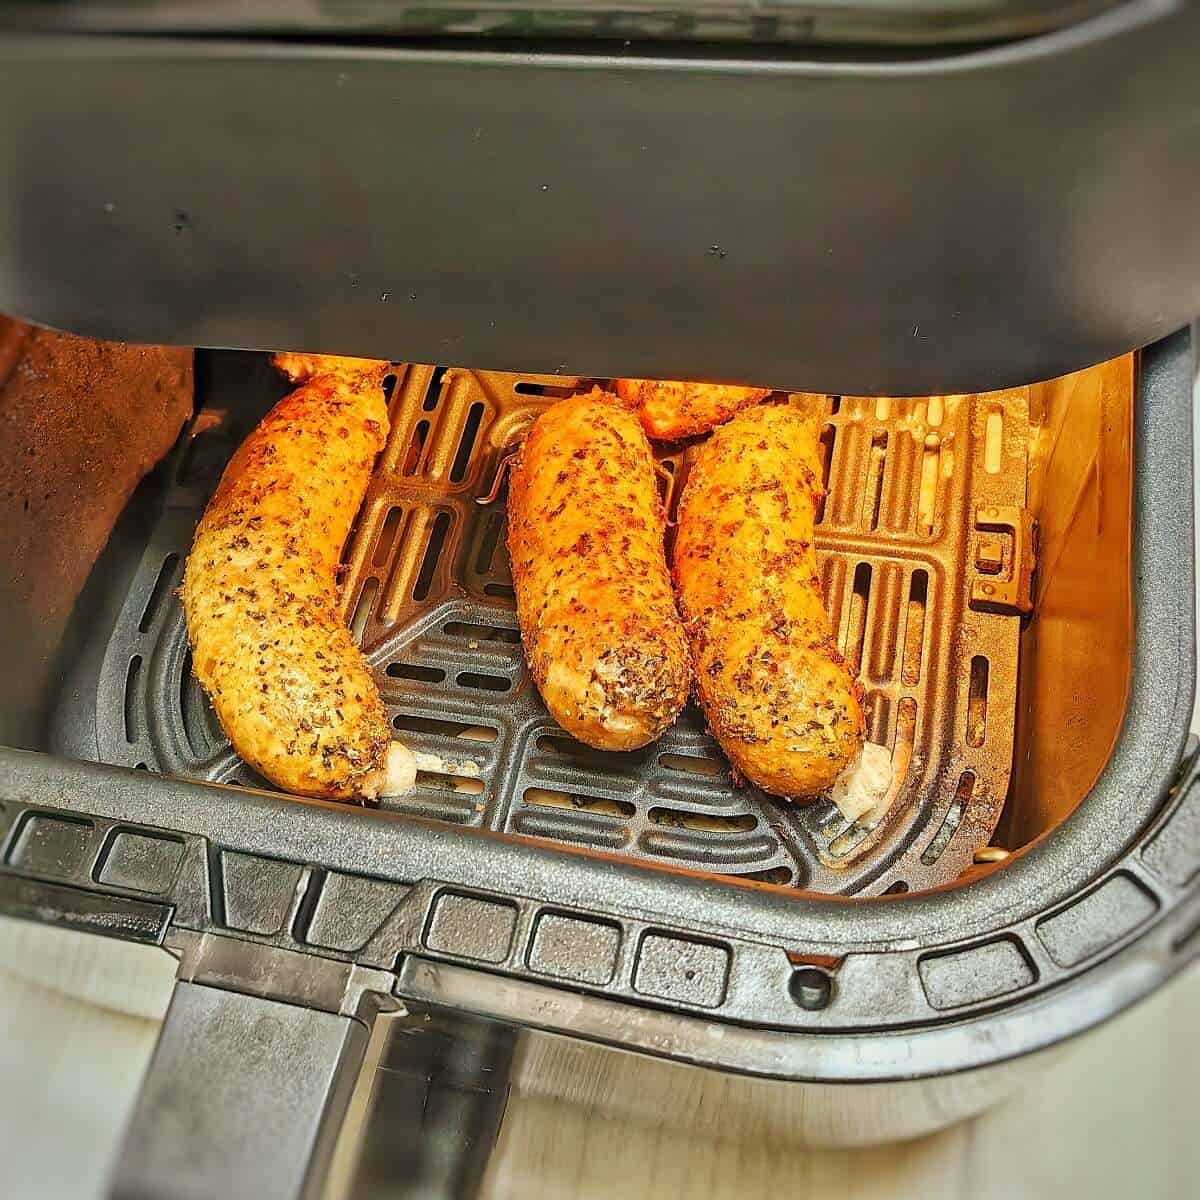 cook the sausages in the air fryer